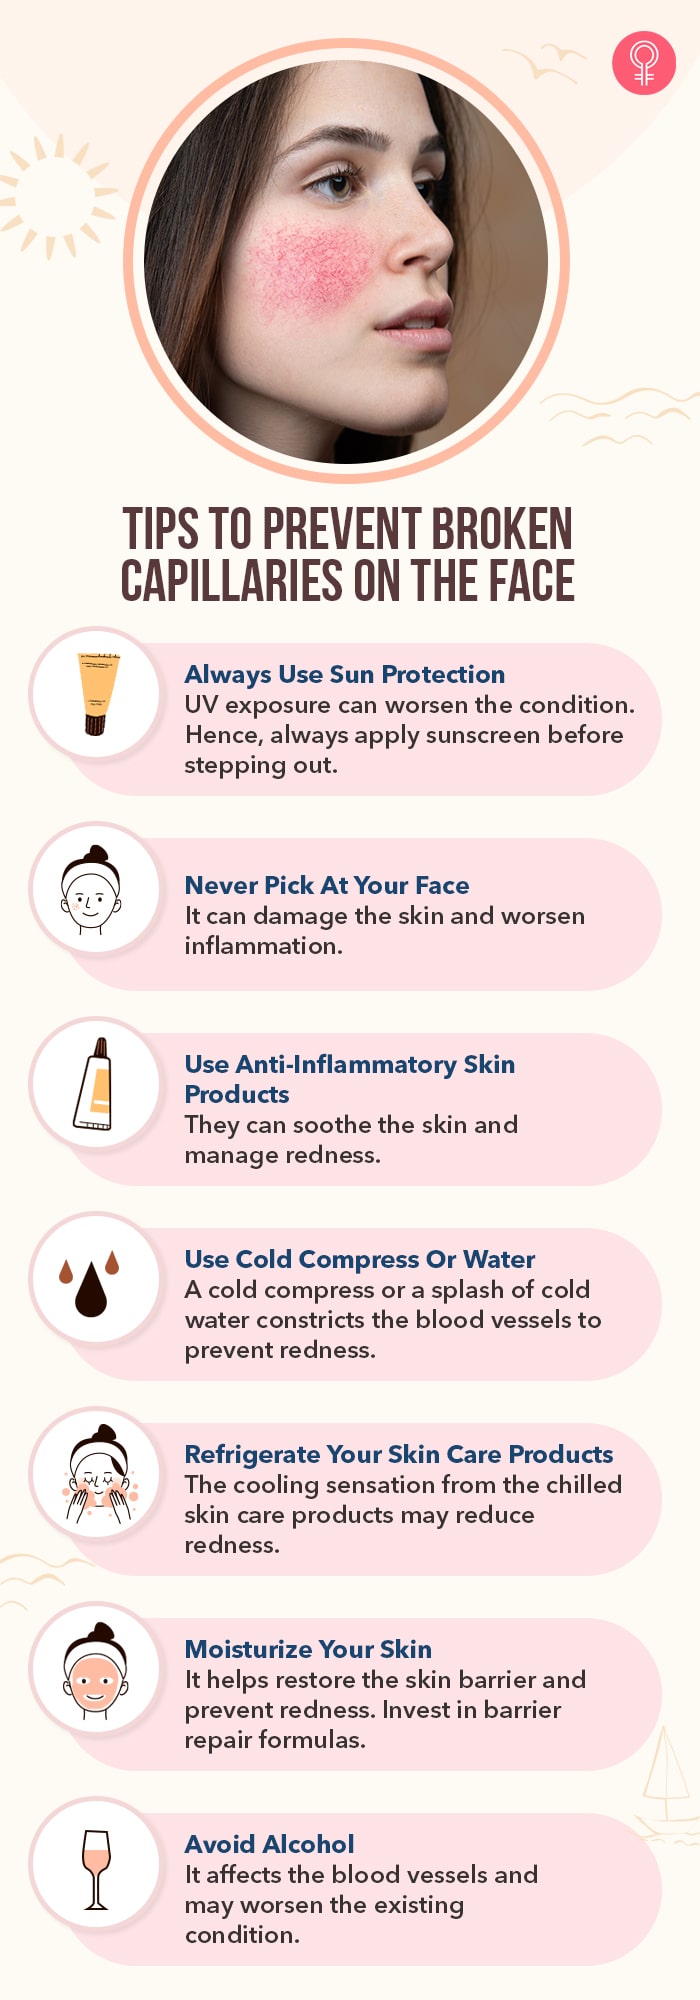 7 amazing tips to prevent broken capillaries on the face (infographic)